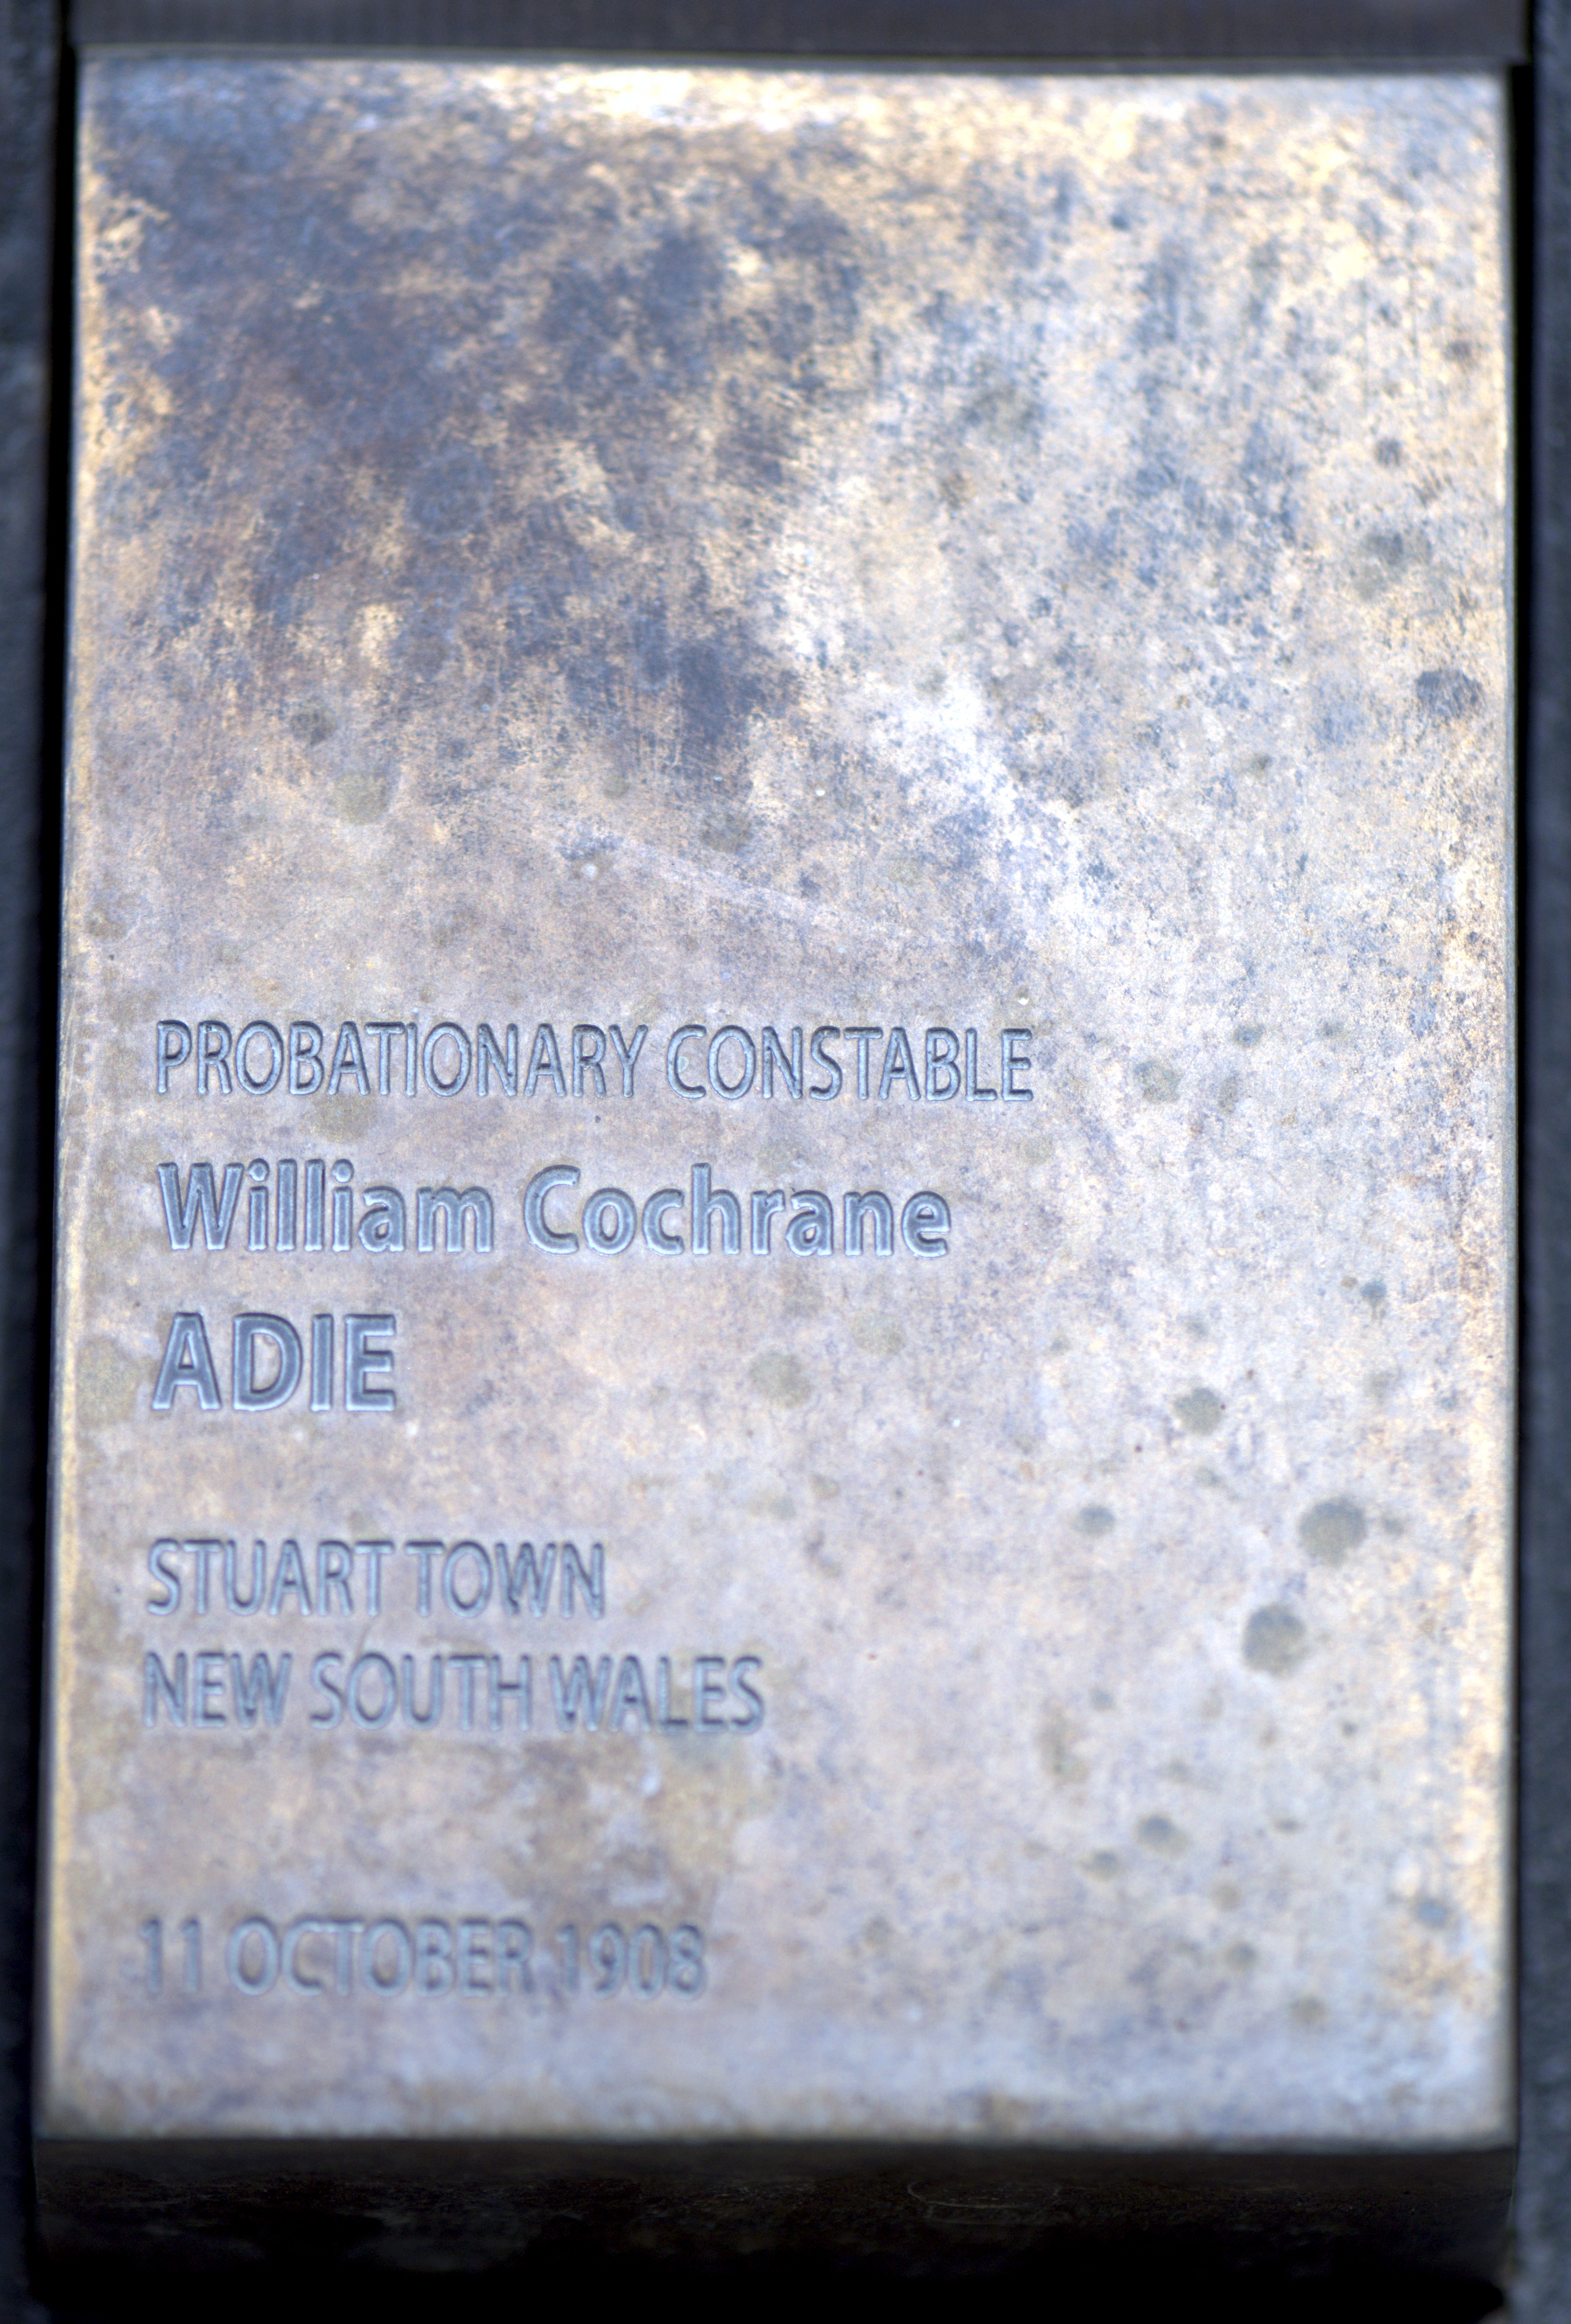 Probationary Constable William Cochrane ADIE Touch Plate at the National Police Wall of Remembrance, Canberra